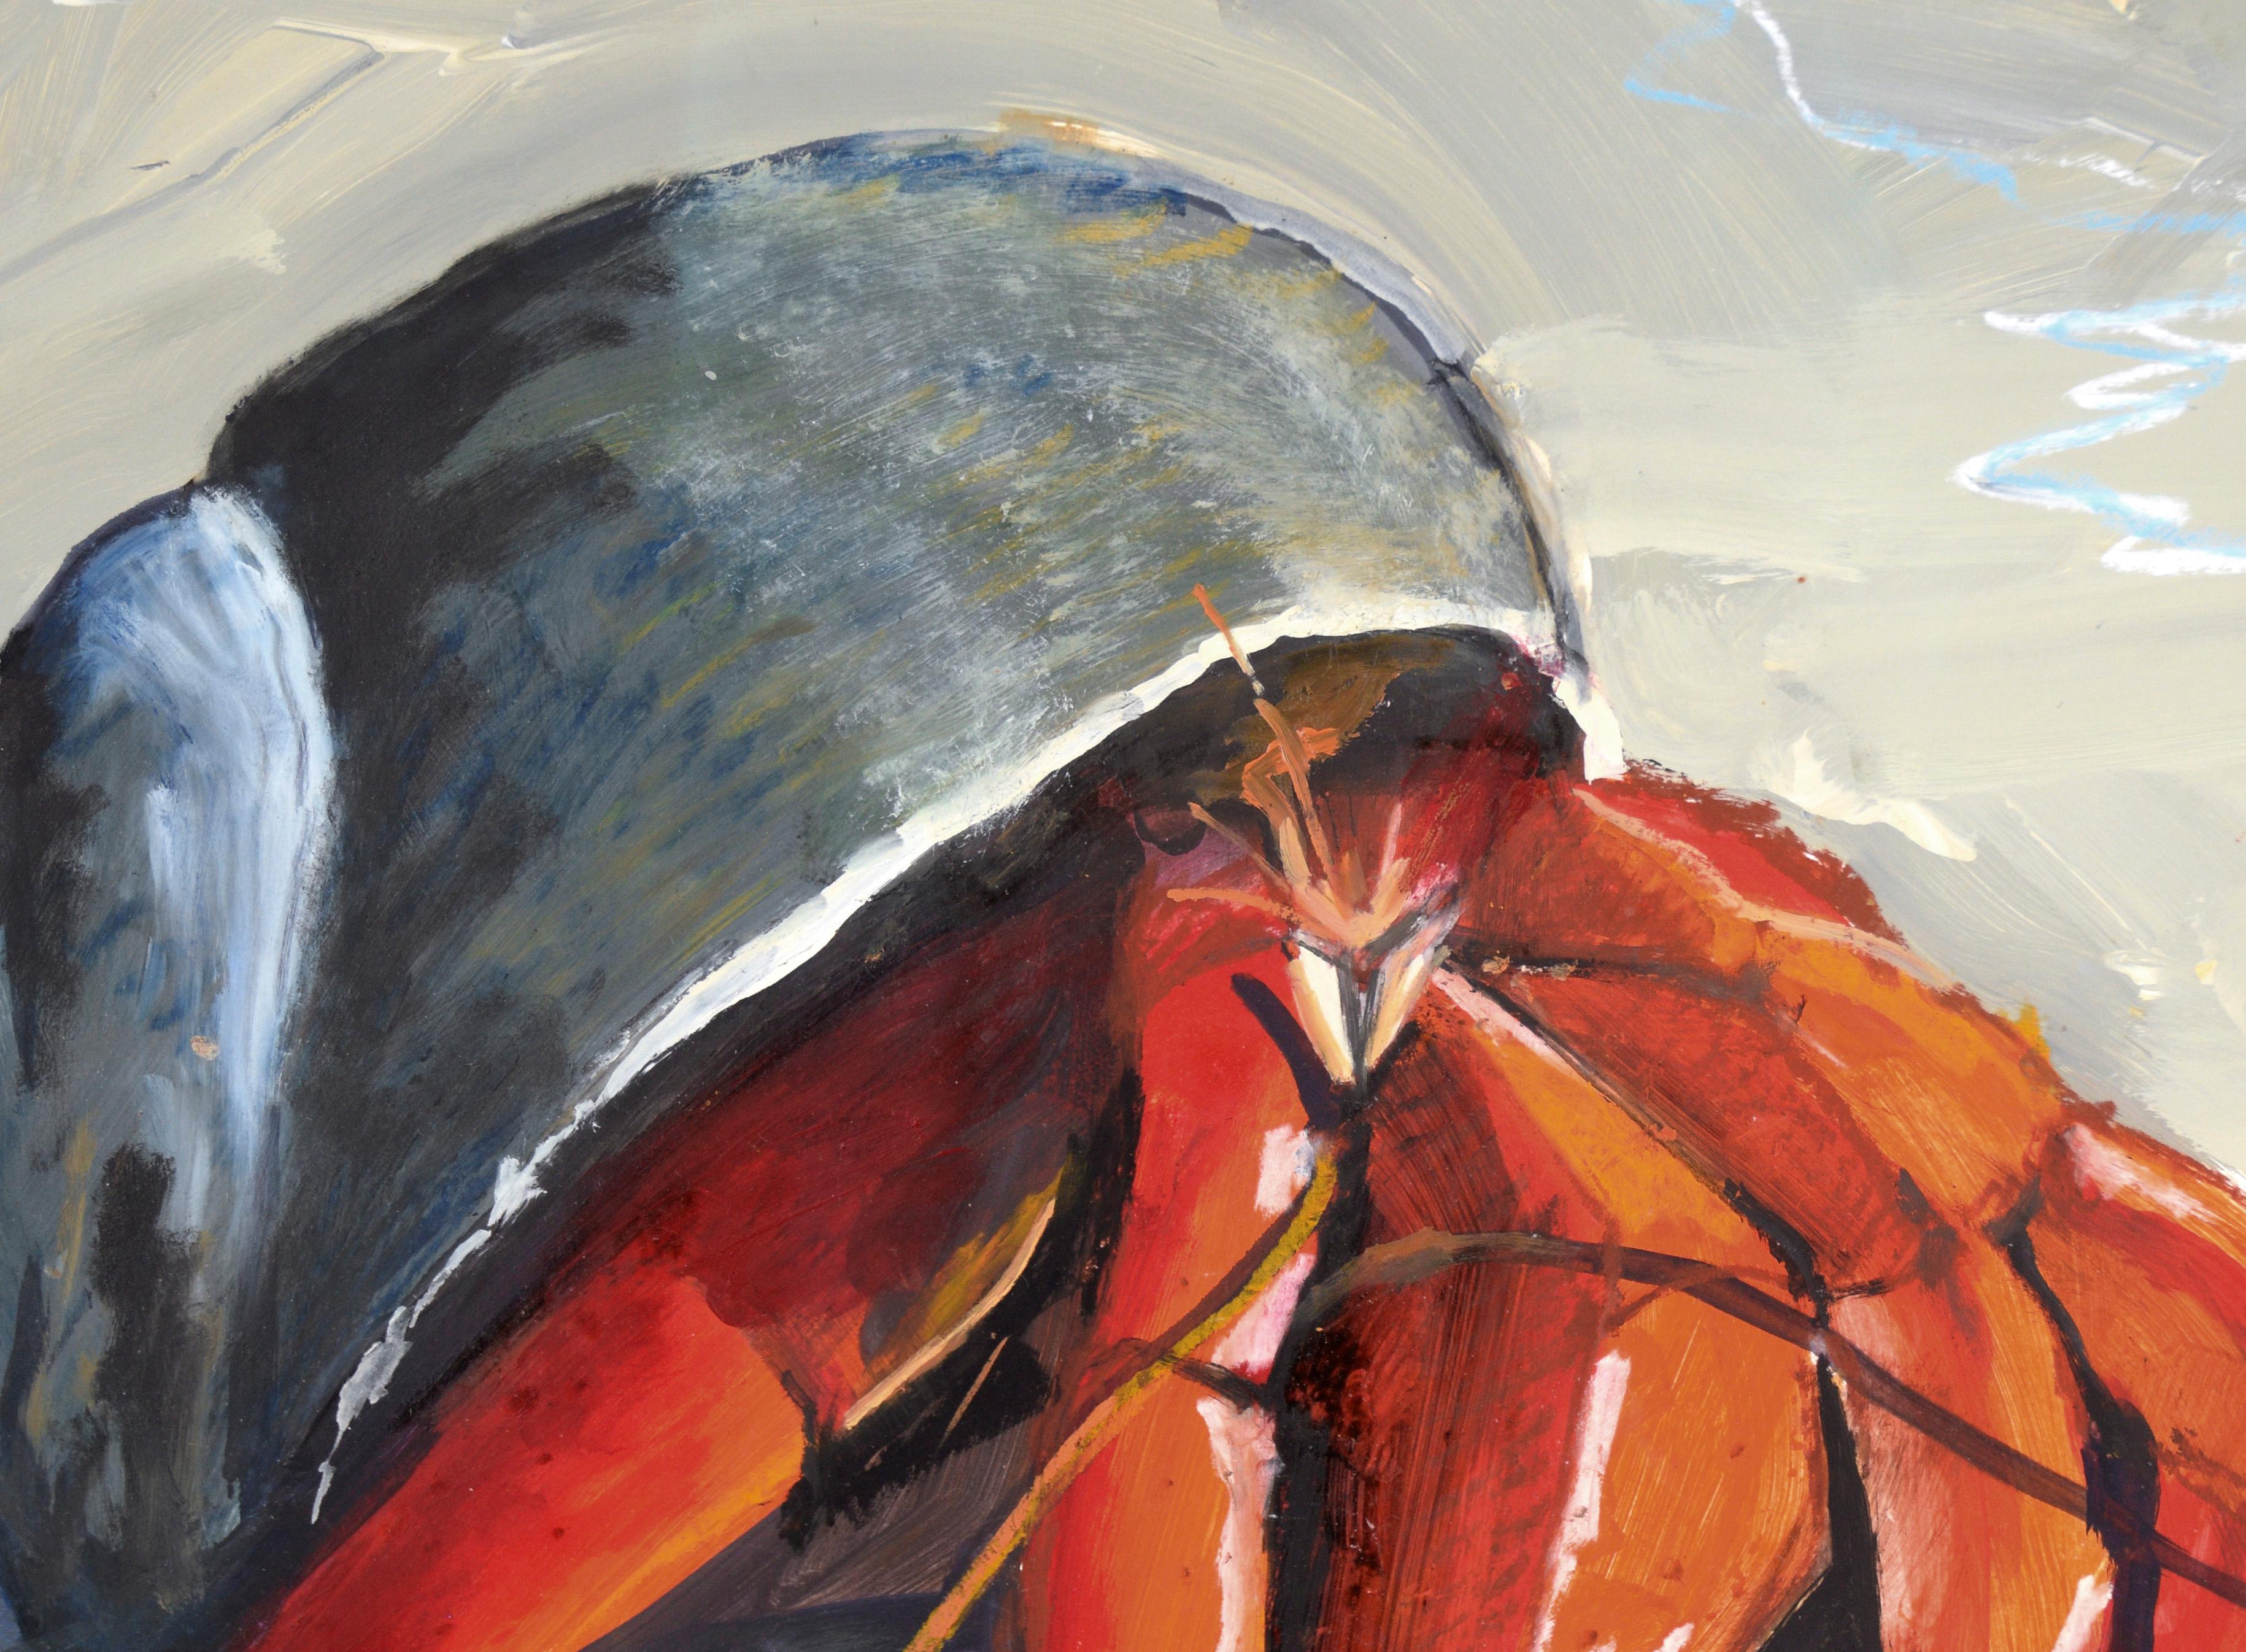 Hermit Crab on the Sand in Acrylic on Paper - Contemporary Painting by Federico Leon de la Vega